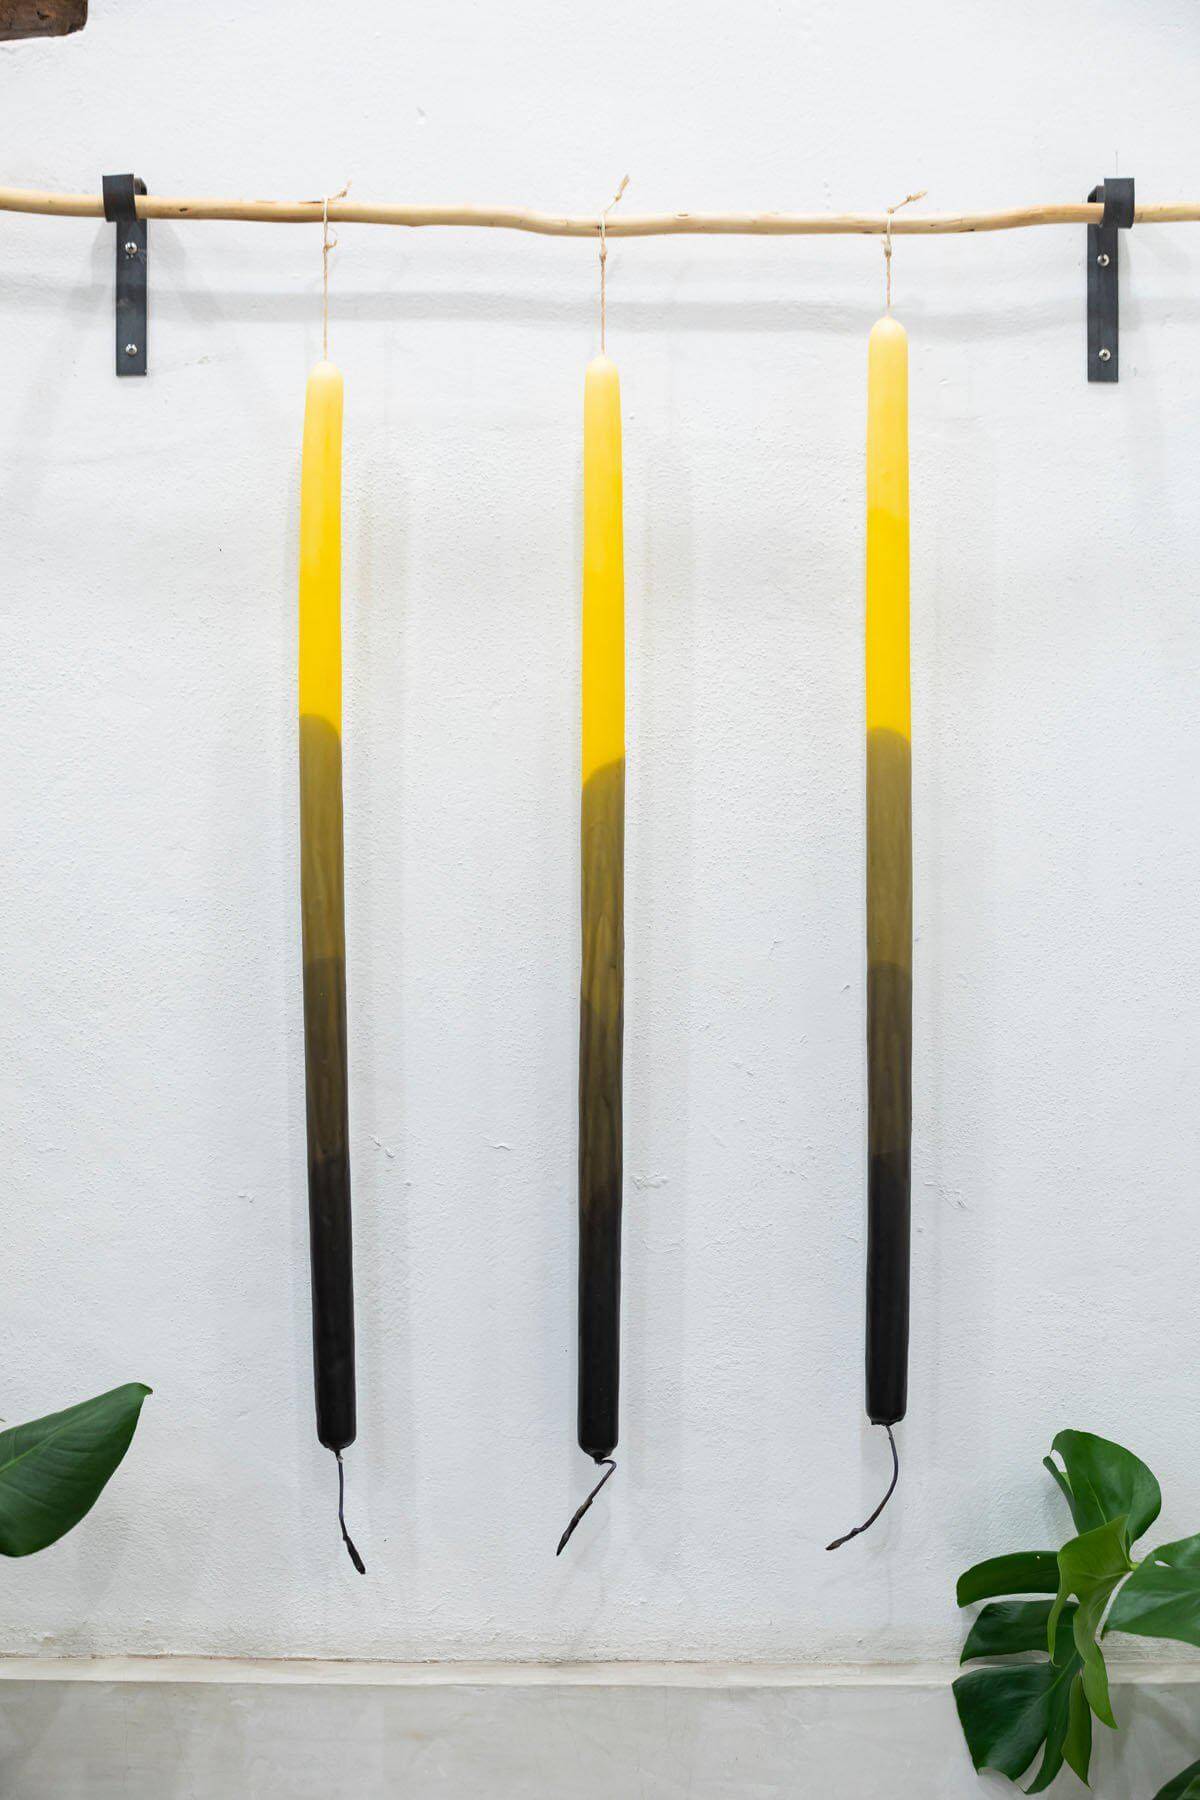 Full view of the extra-large candle, highlighting its impressive length of 34.6 inches.